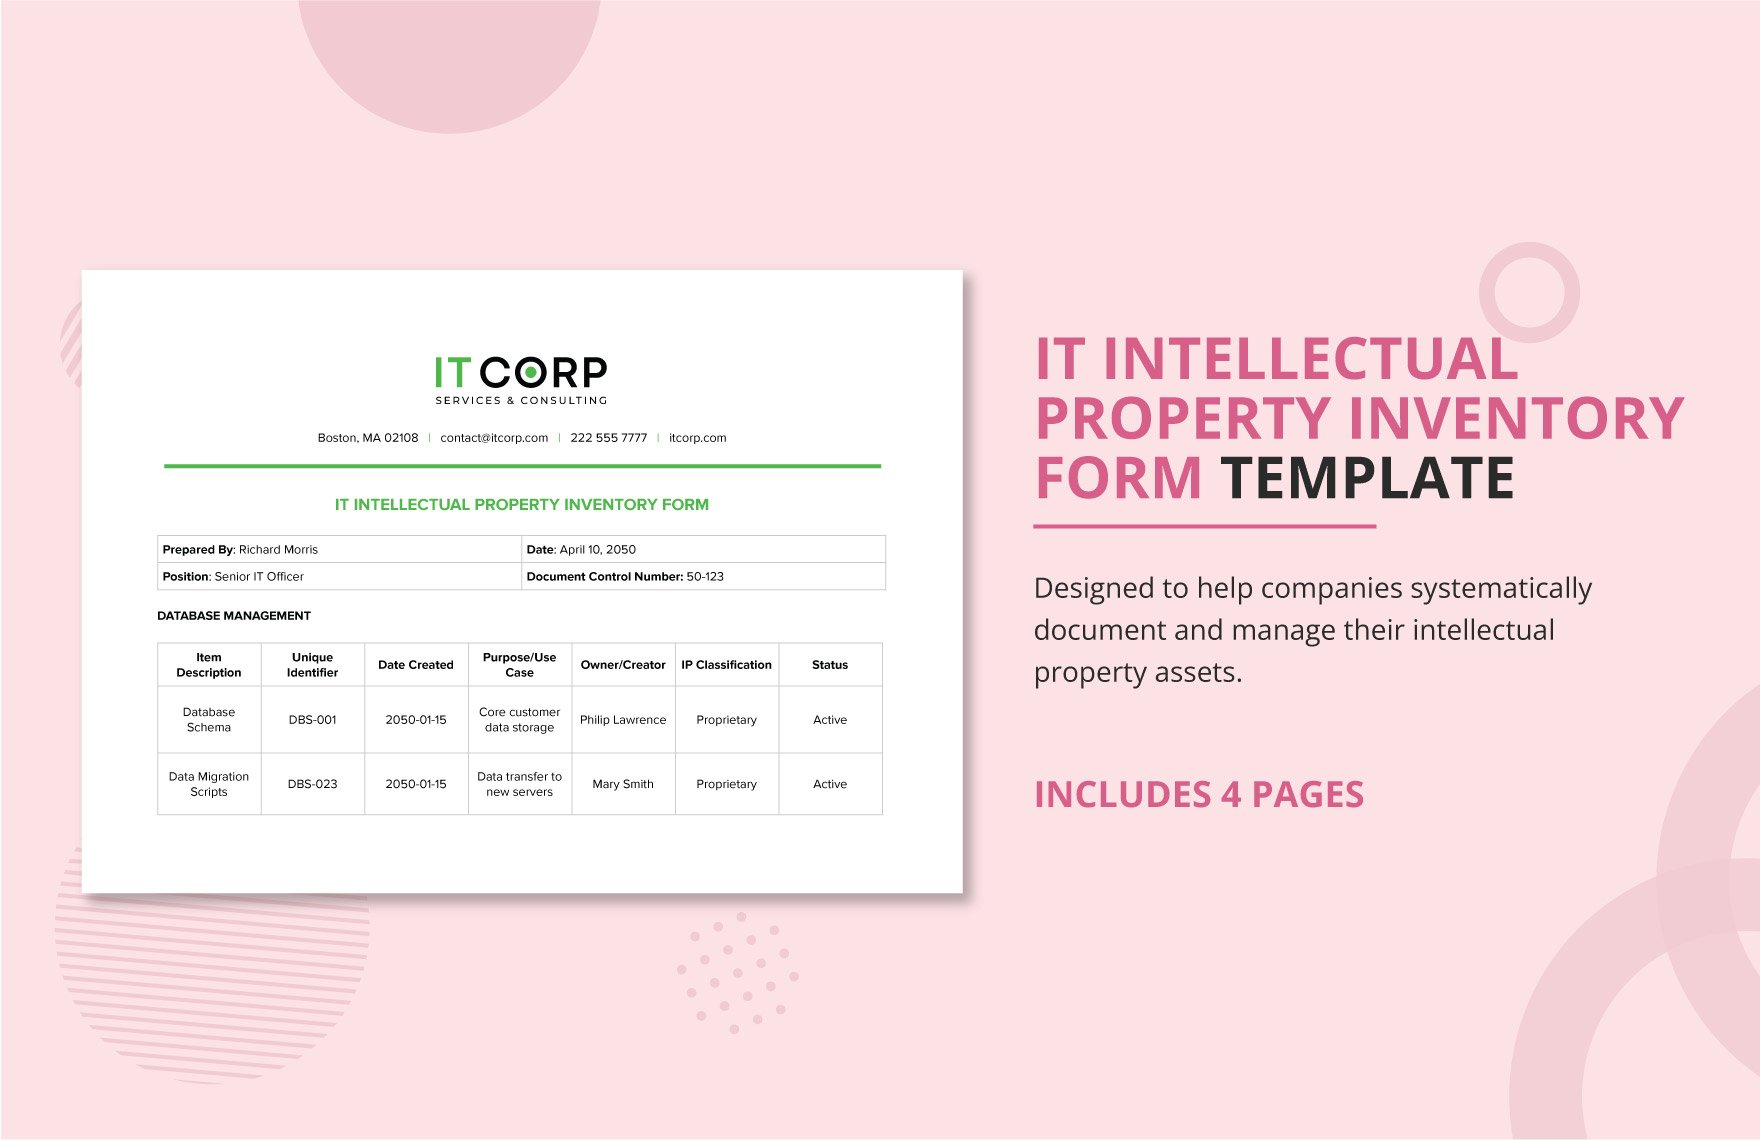 IT Intellectual Property Inventory Form Template